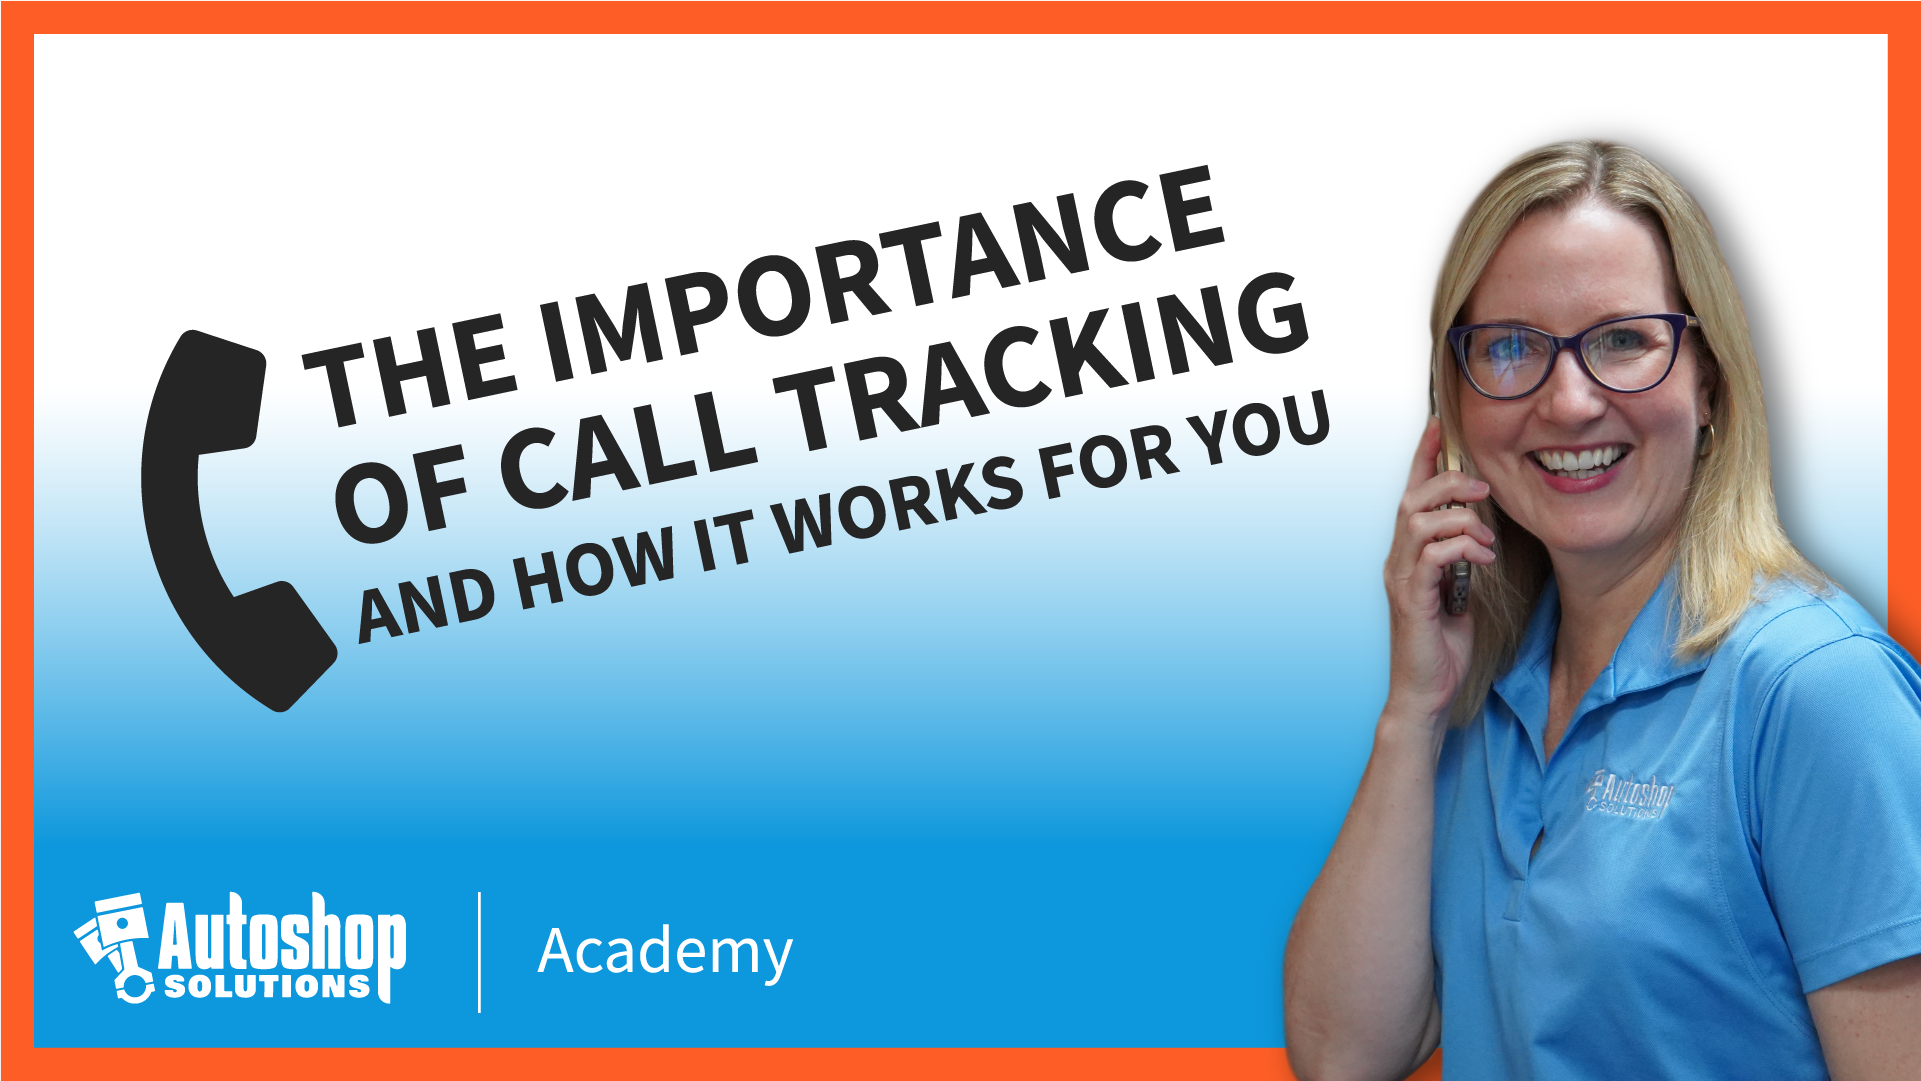 The Importance of Call Tracking and How It Works For You